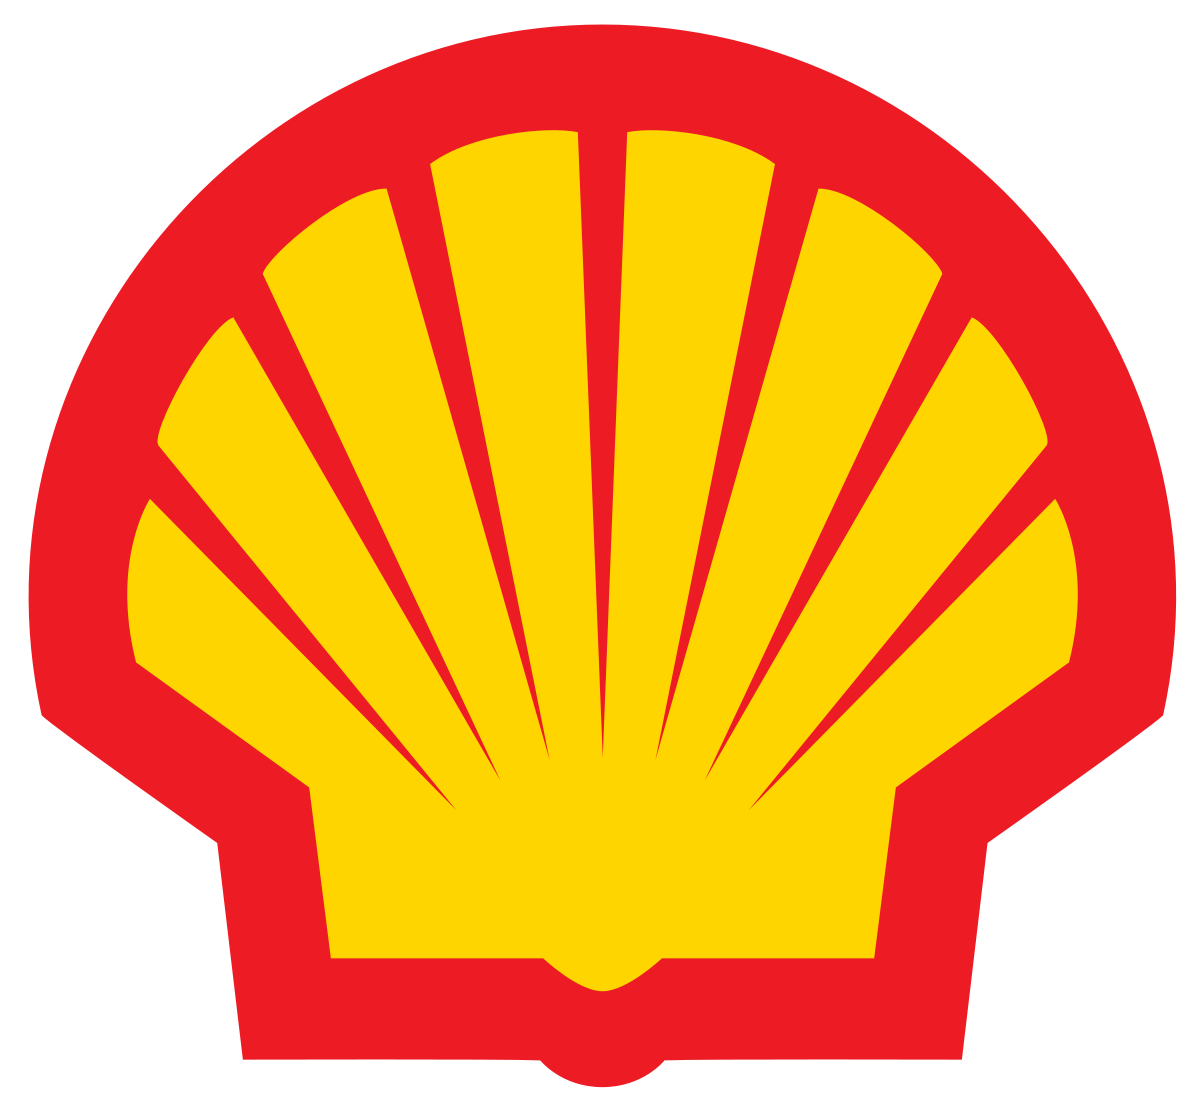 About Shell Company